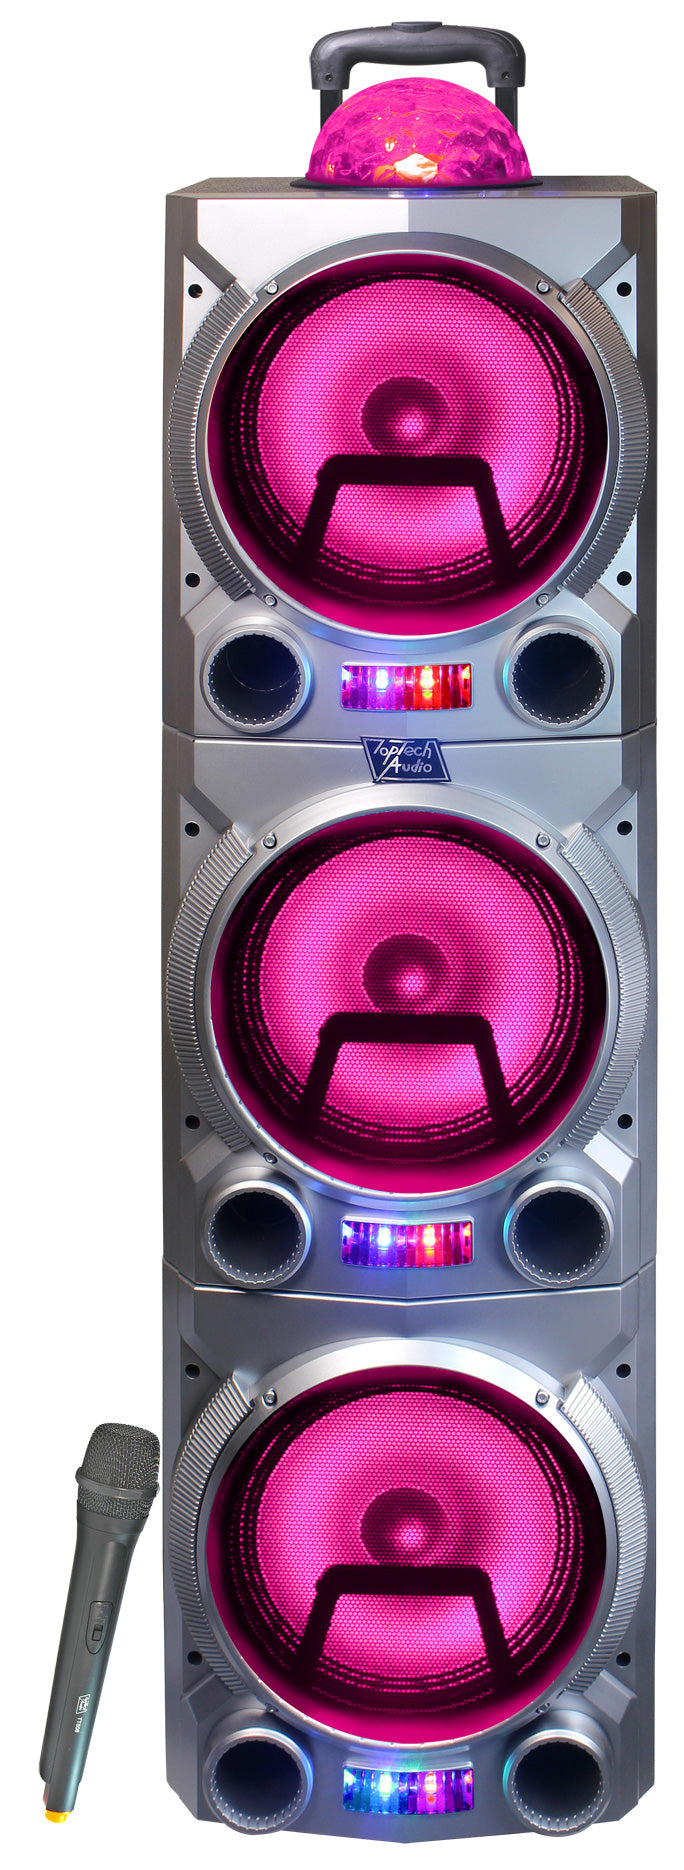 Fully Amplified Portable 6000 watts Peak Power 3X10” Speaker with DISCO BALL